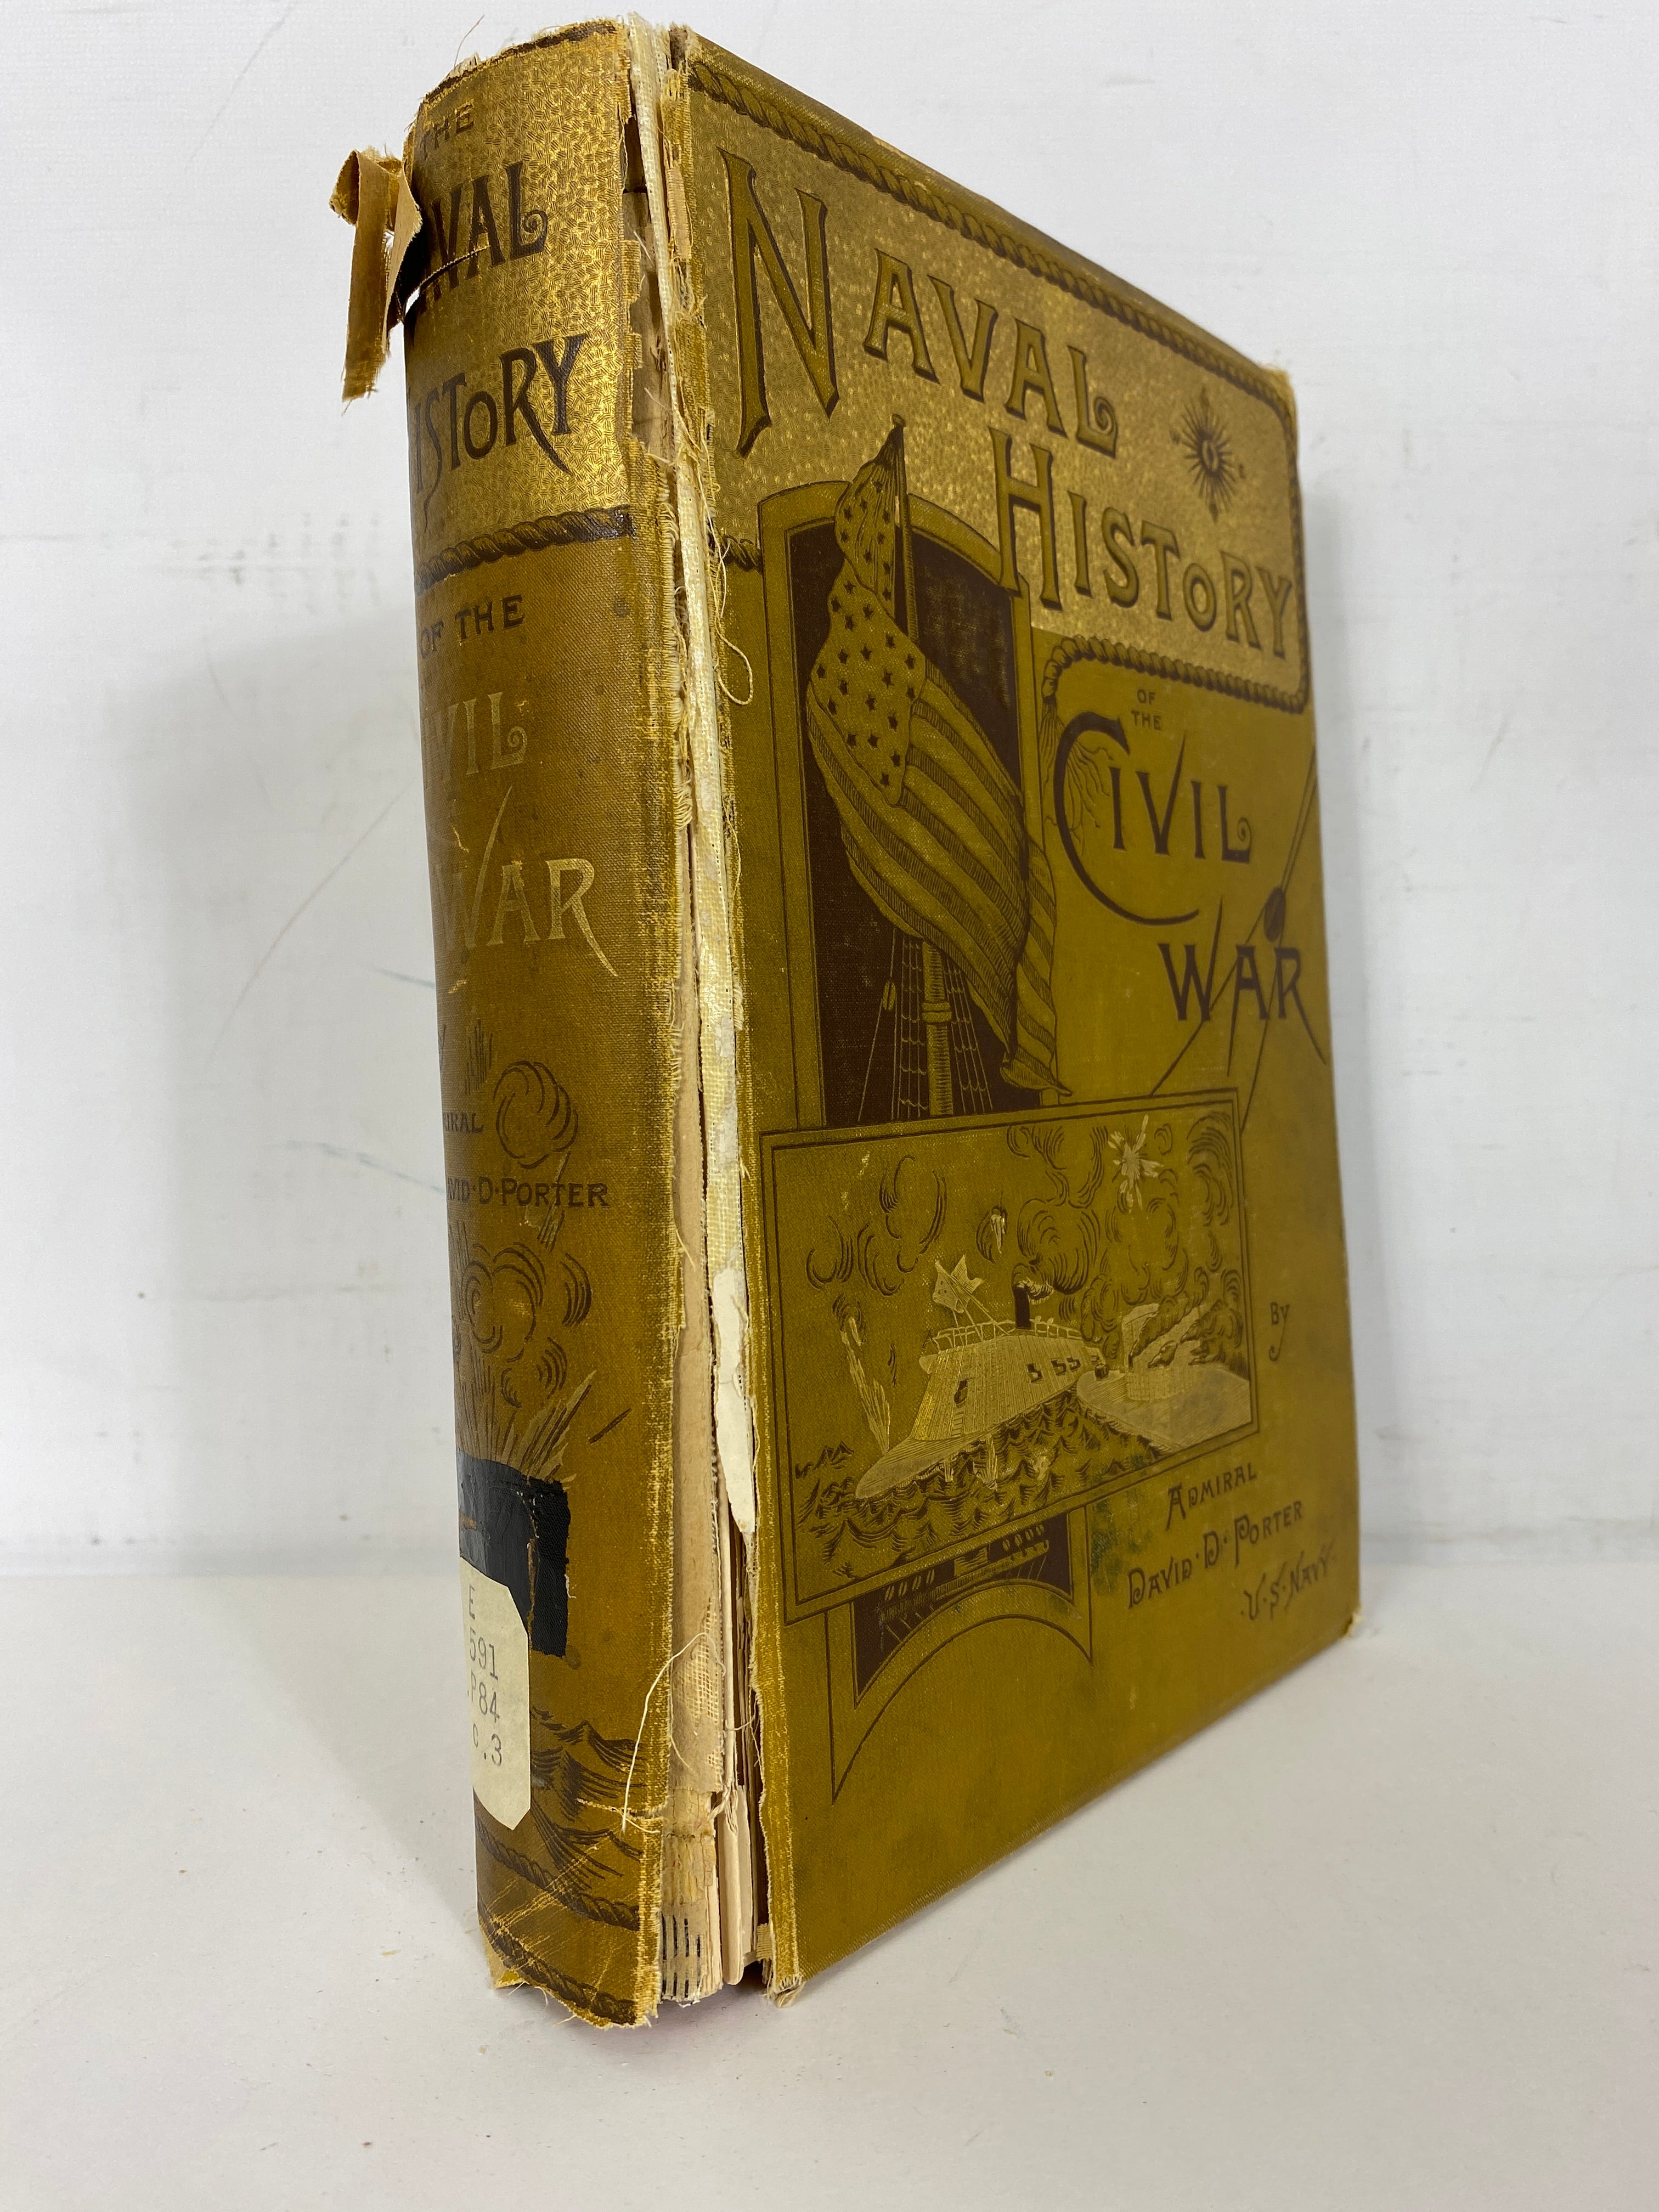 Naval History of the Civil War First Edition by Admiral David D. Porter 1886 HC